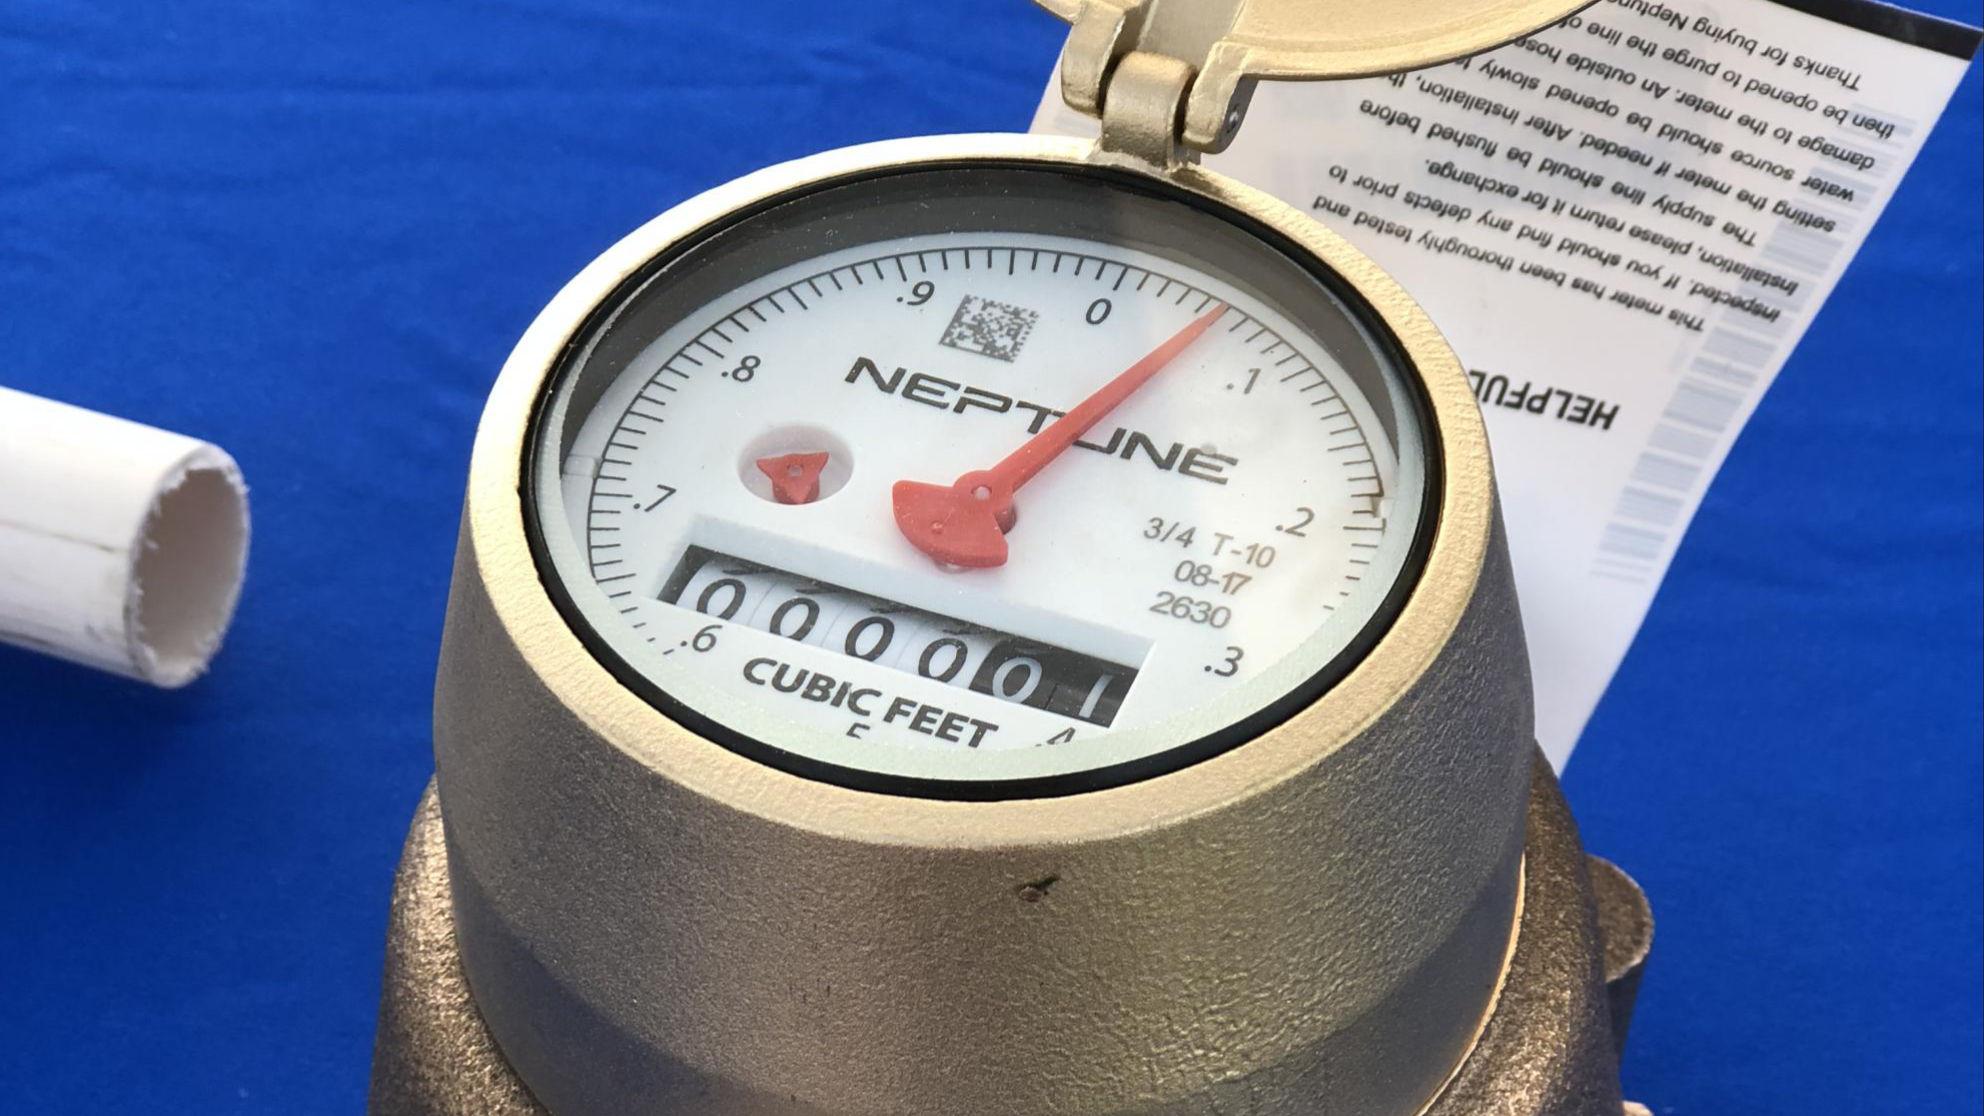 Closeup of a new water meter on a table